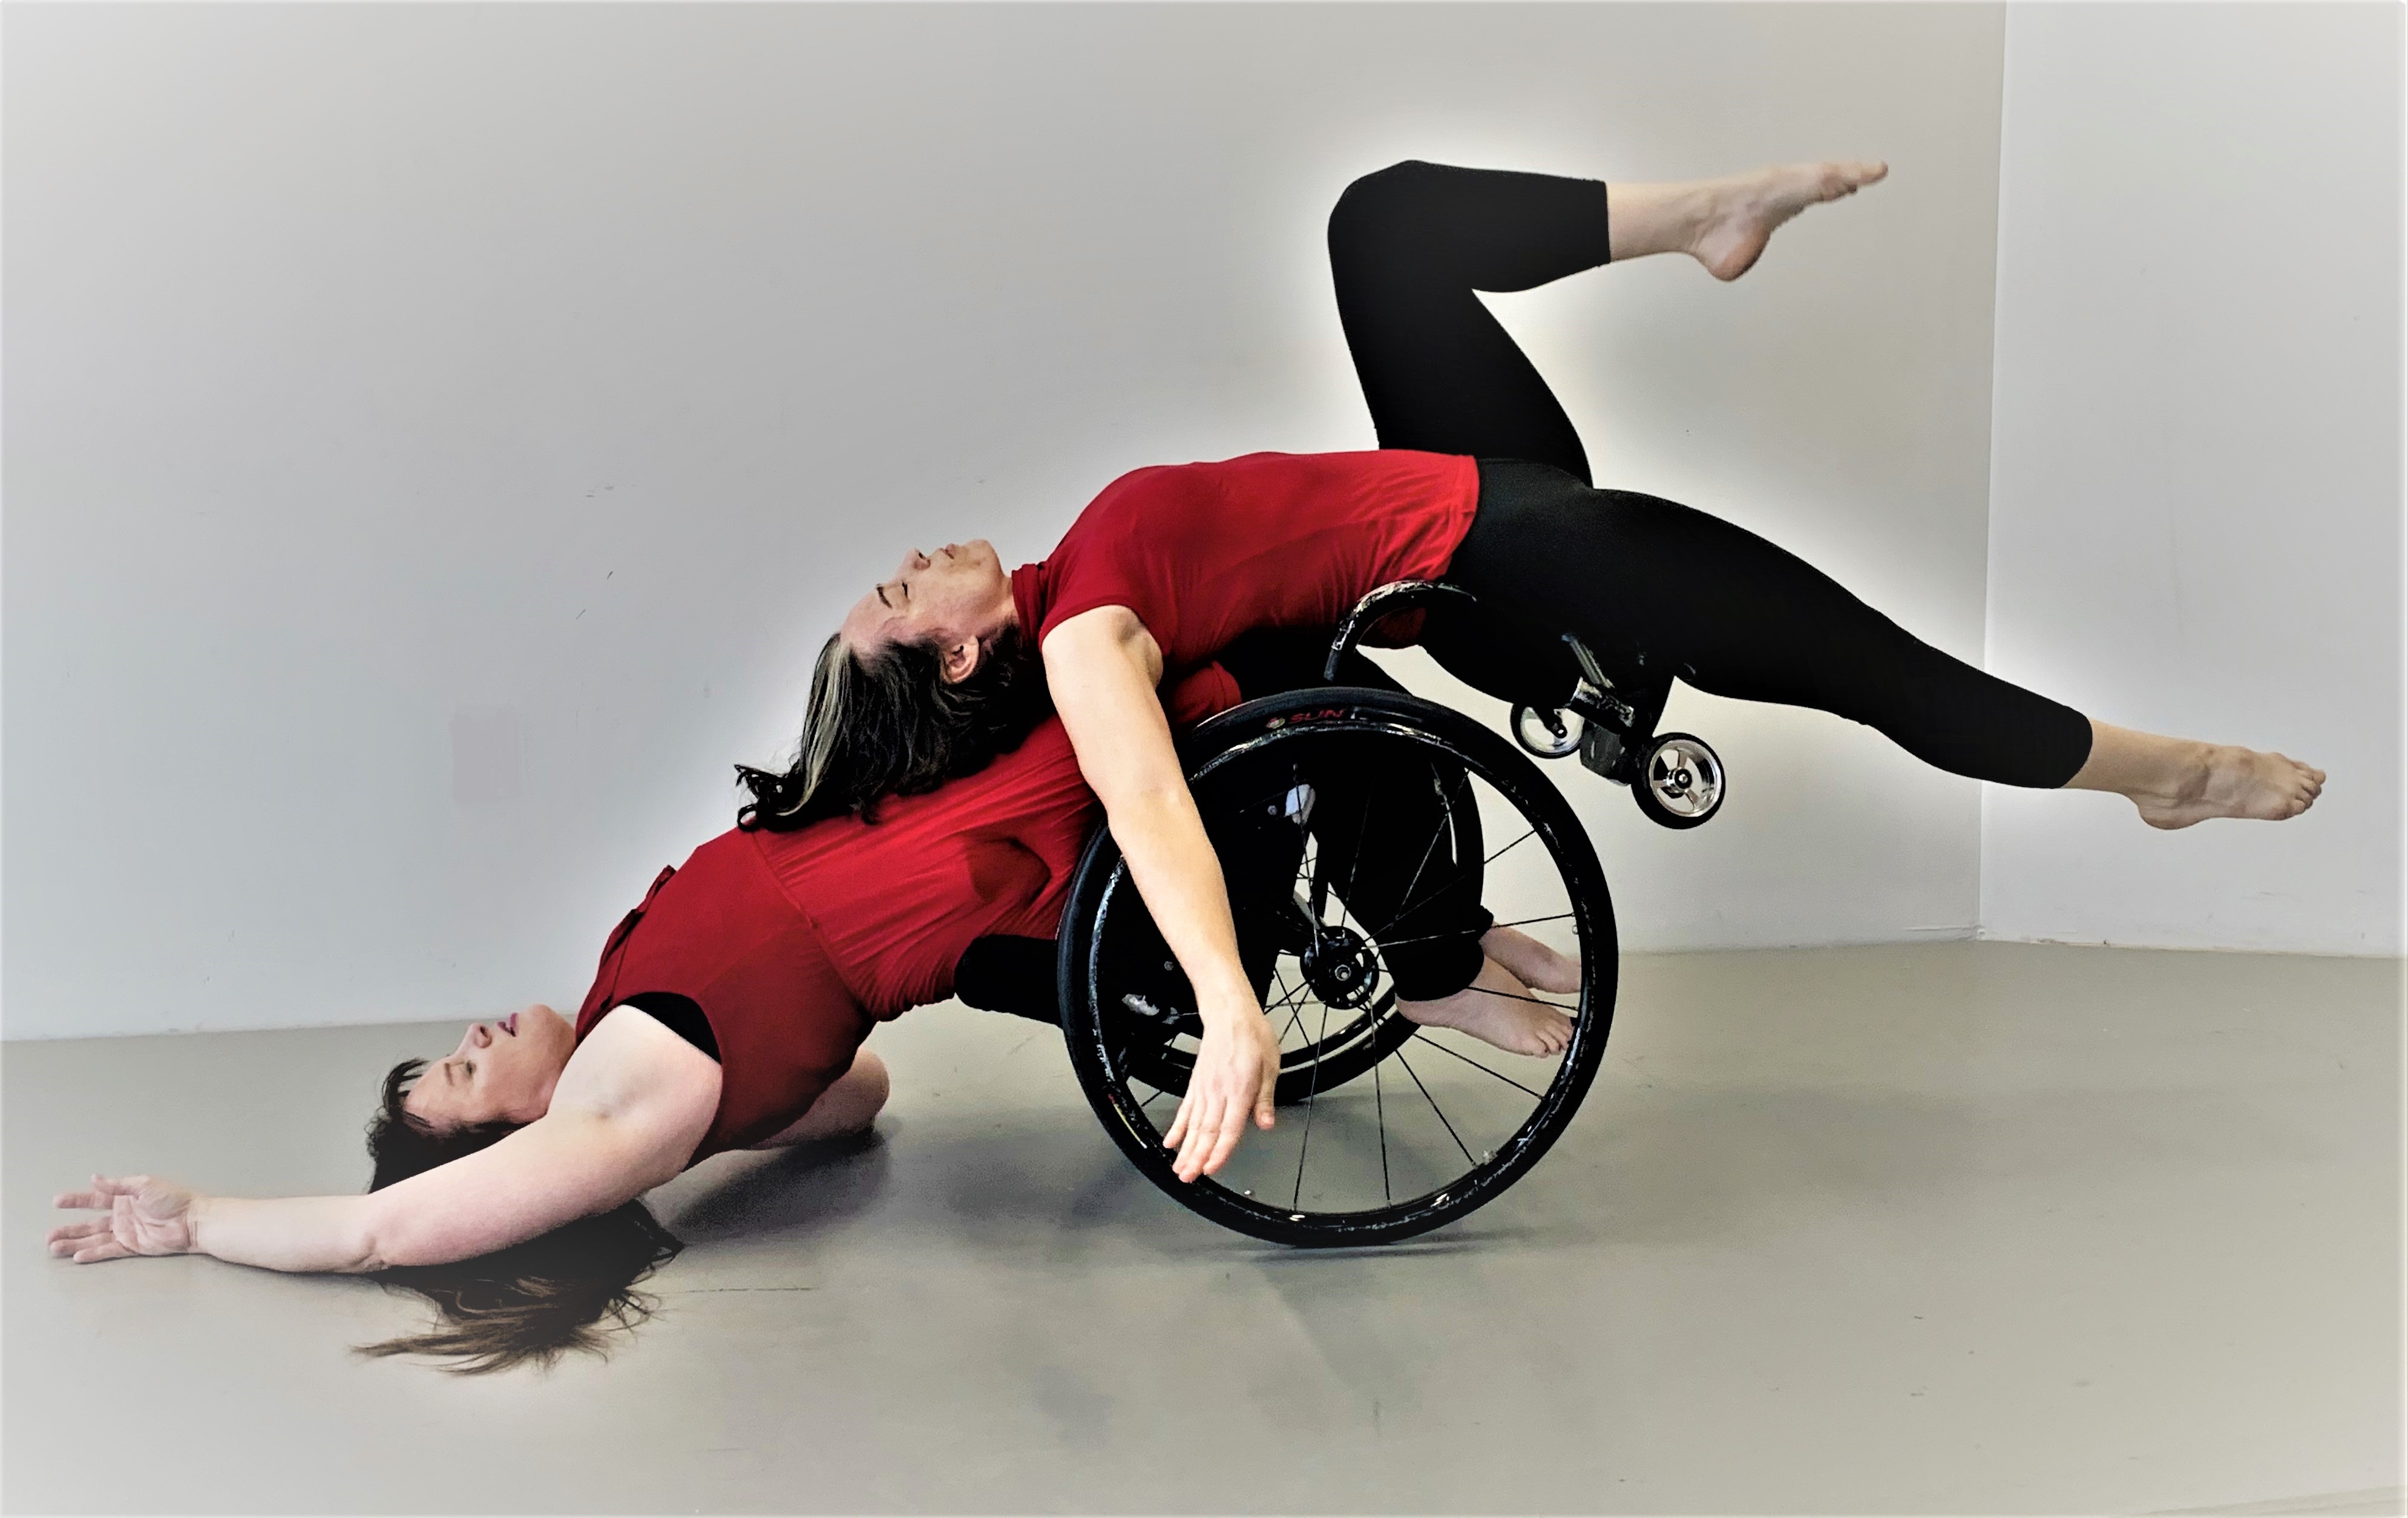 Lindy, a white woman with long brown hair, arches back in her wheelchair with her shoulders barely grazing the ground. Ashlee, a white woman with dark hair, counterbalances Lindy by laying on her footplate and knees. Both are parallel to the floor, creating a pose that suggests Ashlee is using her body weight to return Lindy to an upright position in her chair. The dancers wear red tops and black leggings.